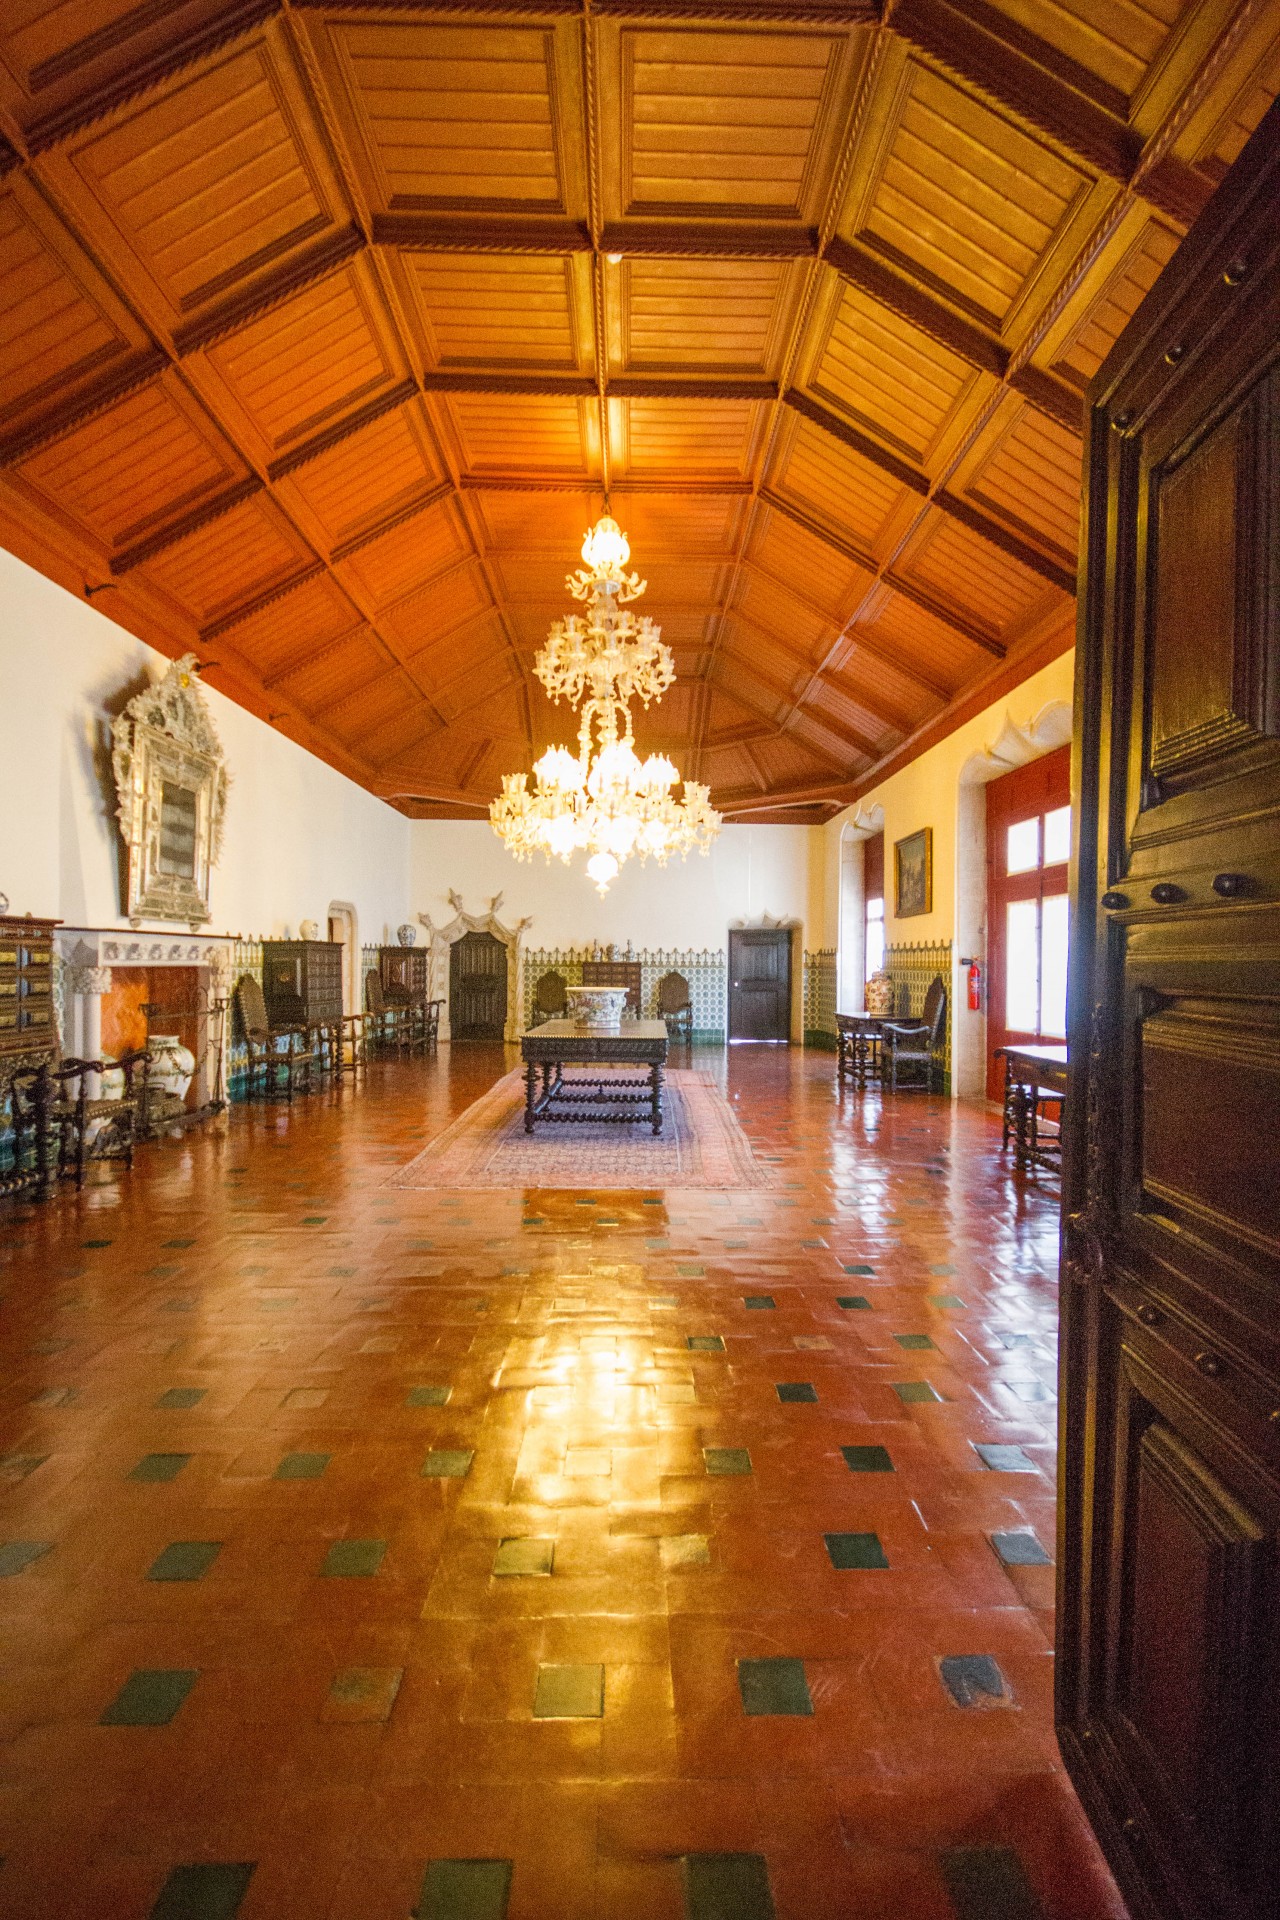 Great hall in the Sintra National Palace with a stunning chandalier and intricate wood ceiling - Sintra, Portugal